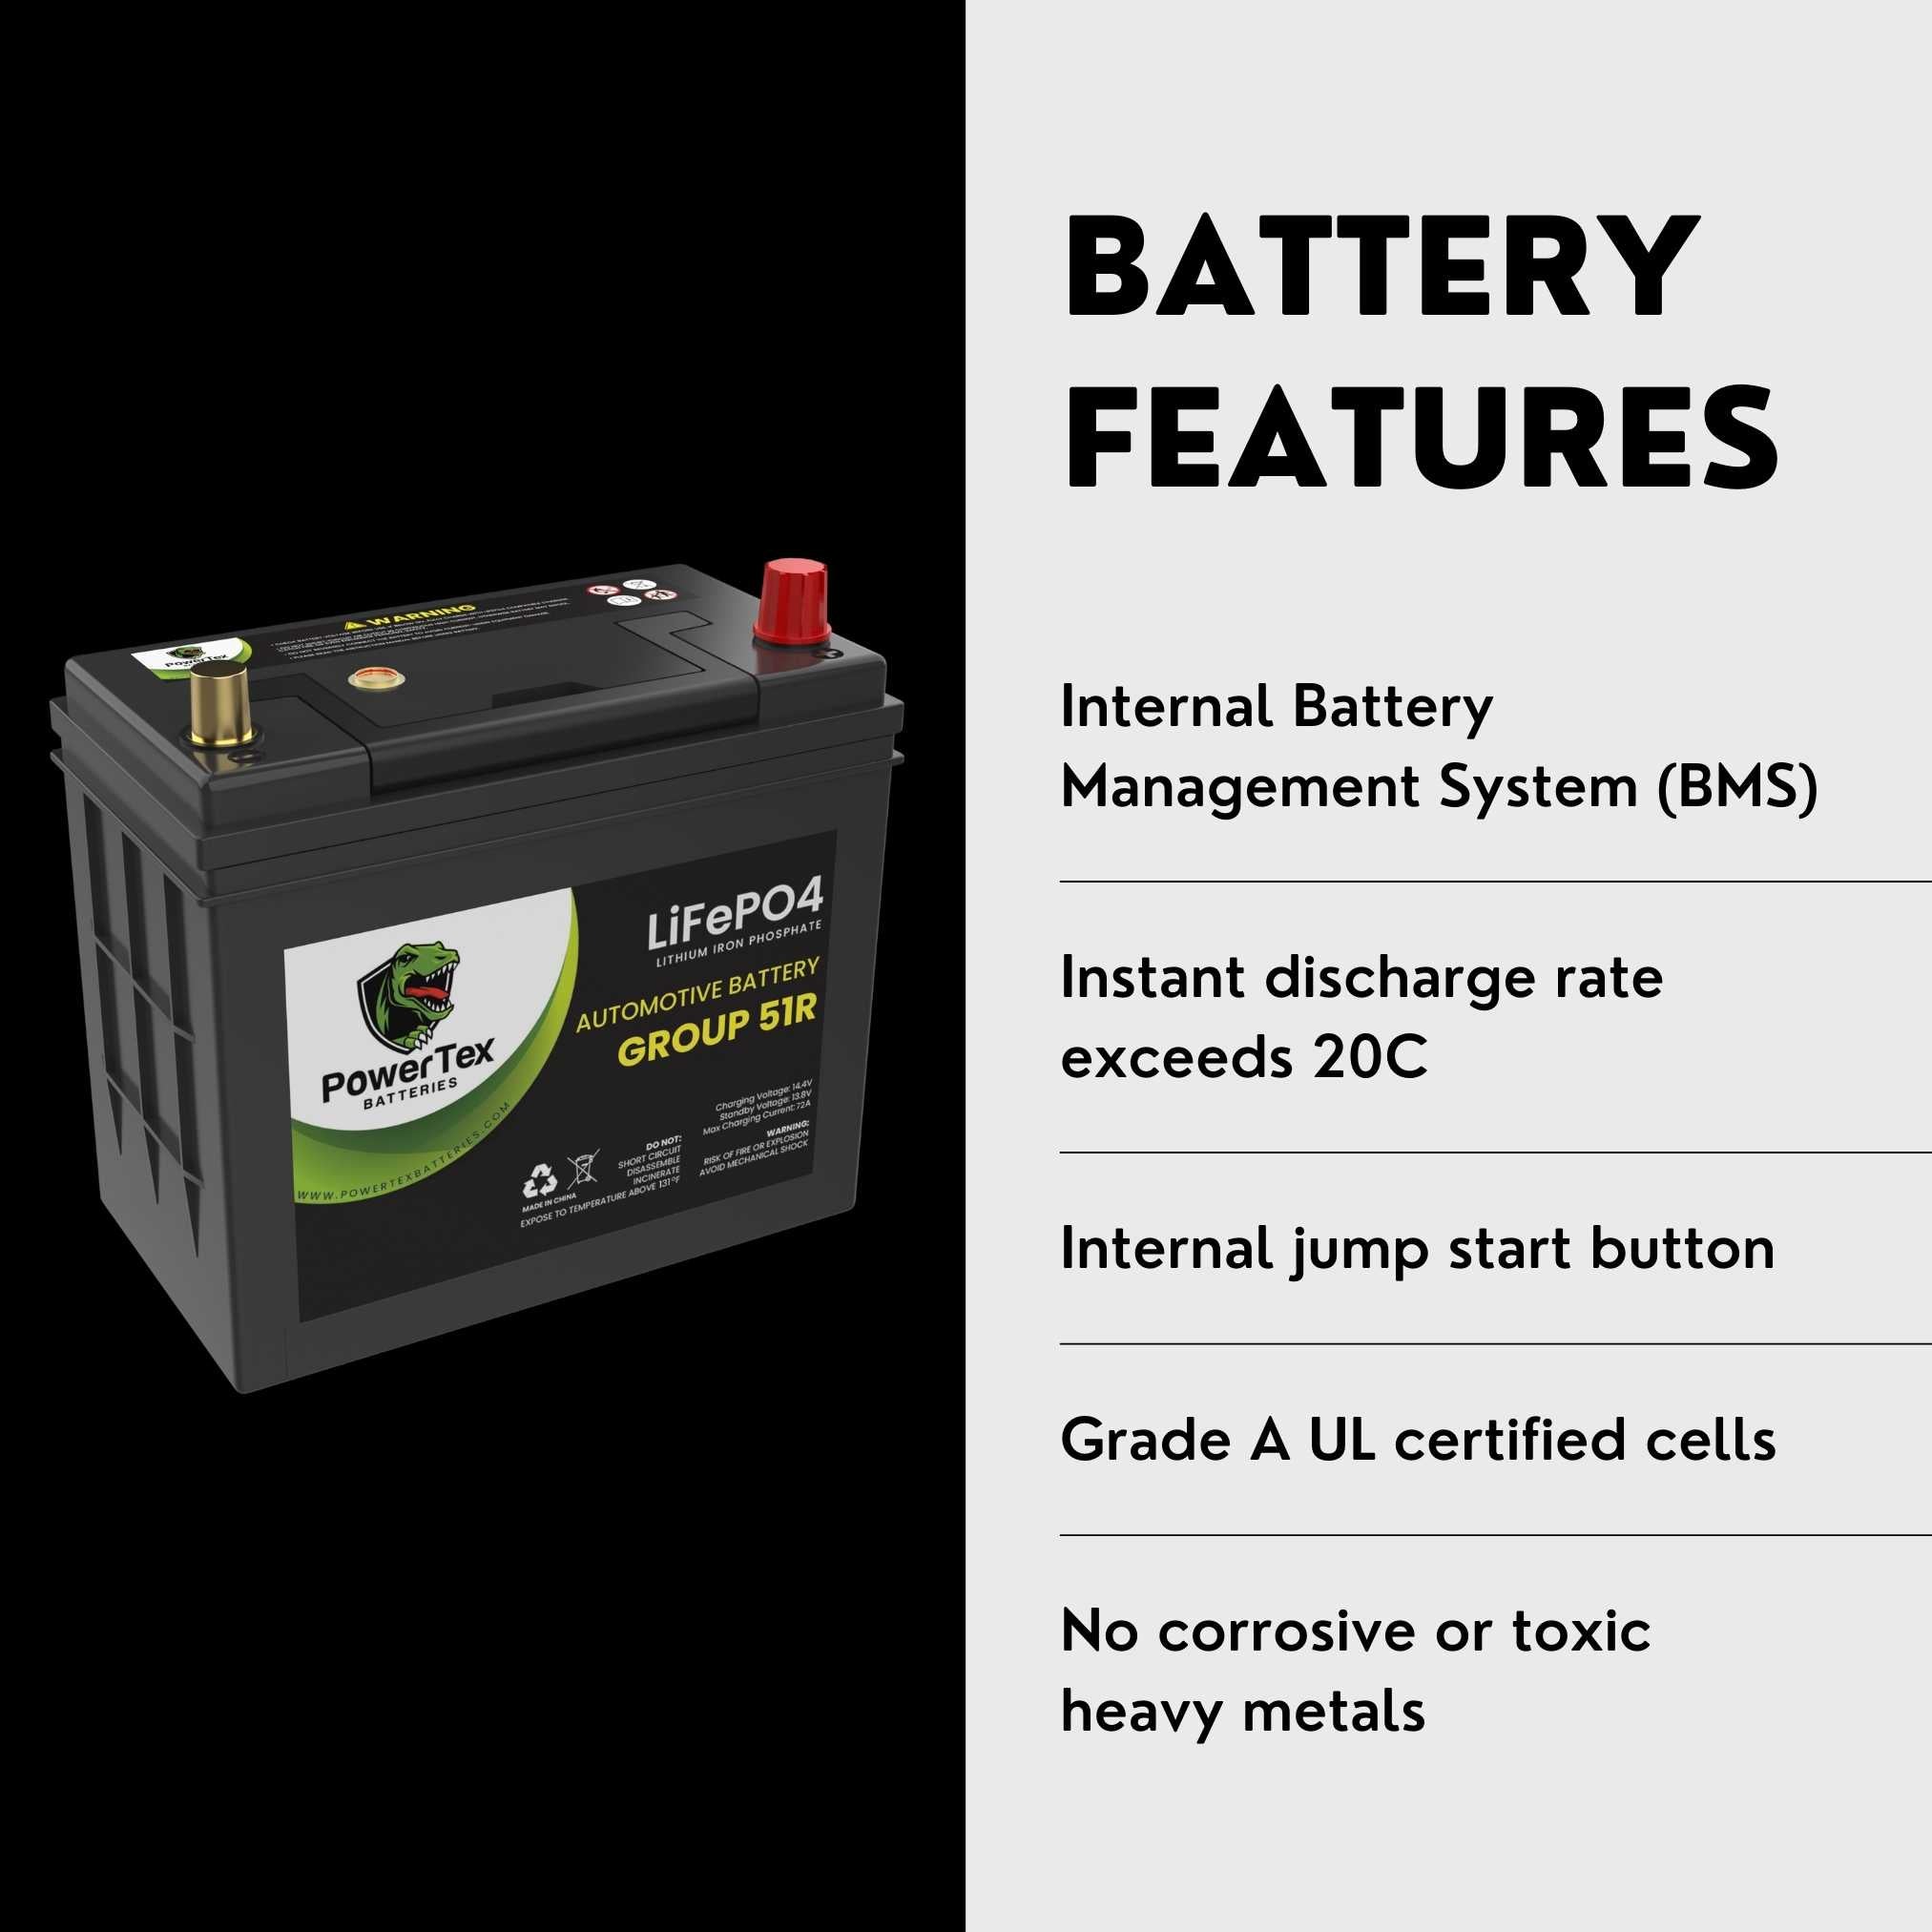 2017 Nissan GT-R Car Battery BCI Group 51R Lithium LiFePO4 Automotive Battery